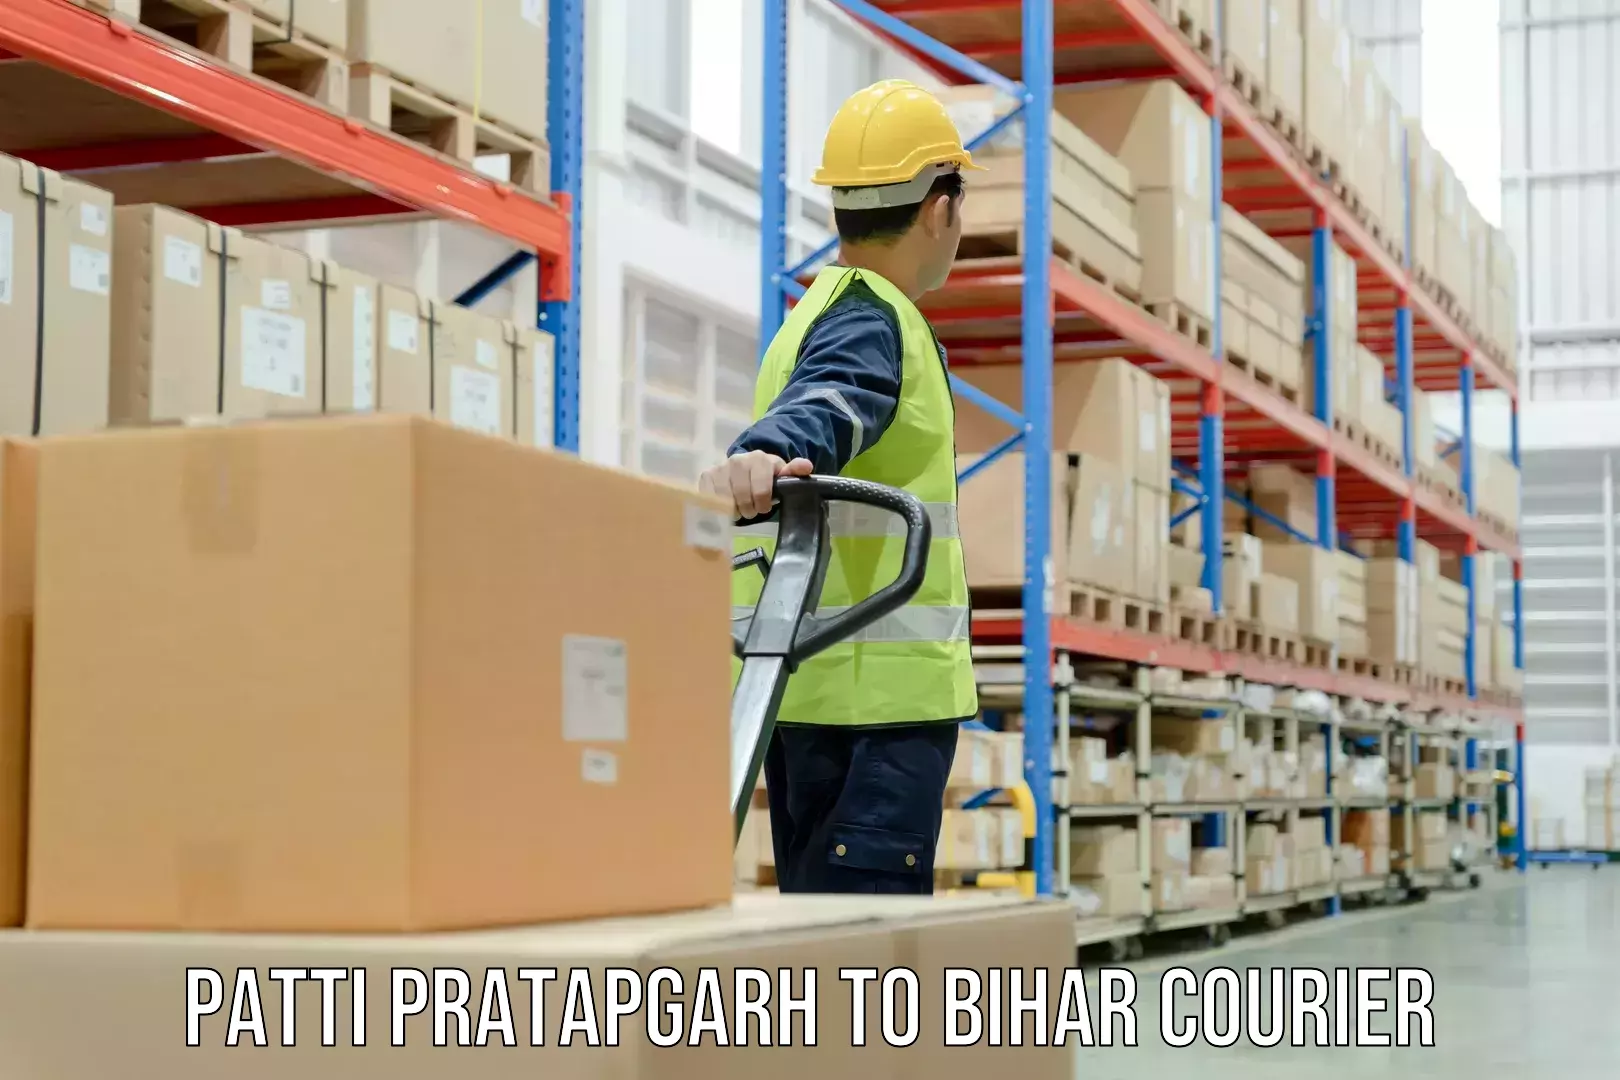 Package delivery network Patti Pratapgarh to West Champaran